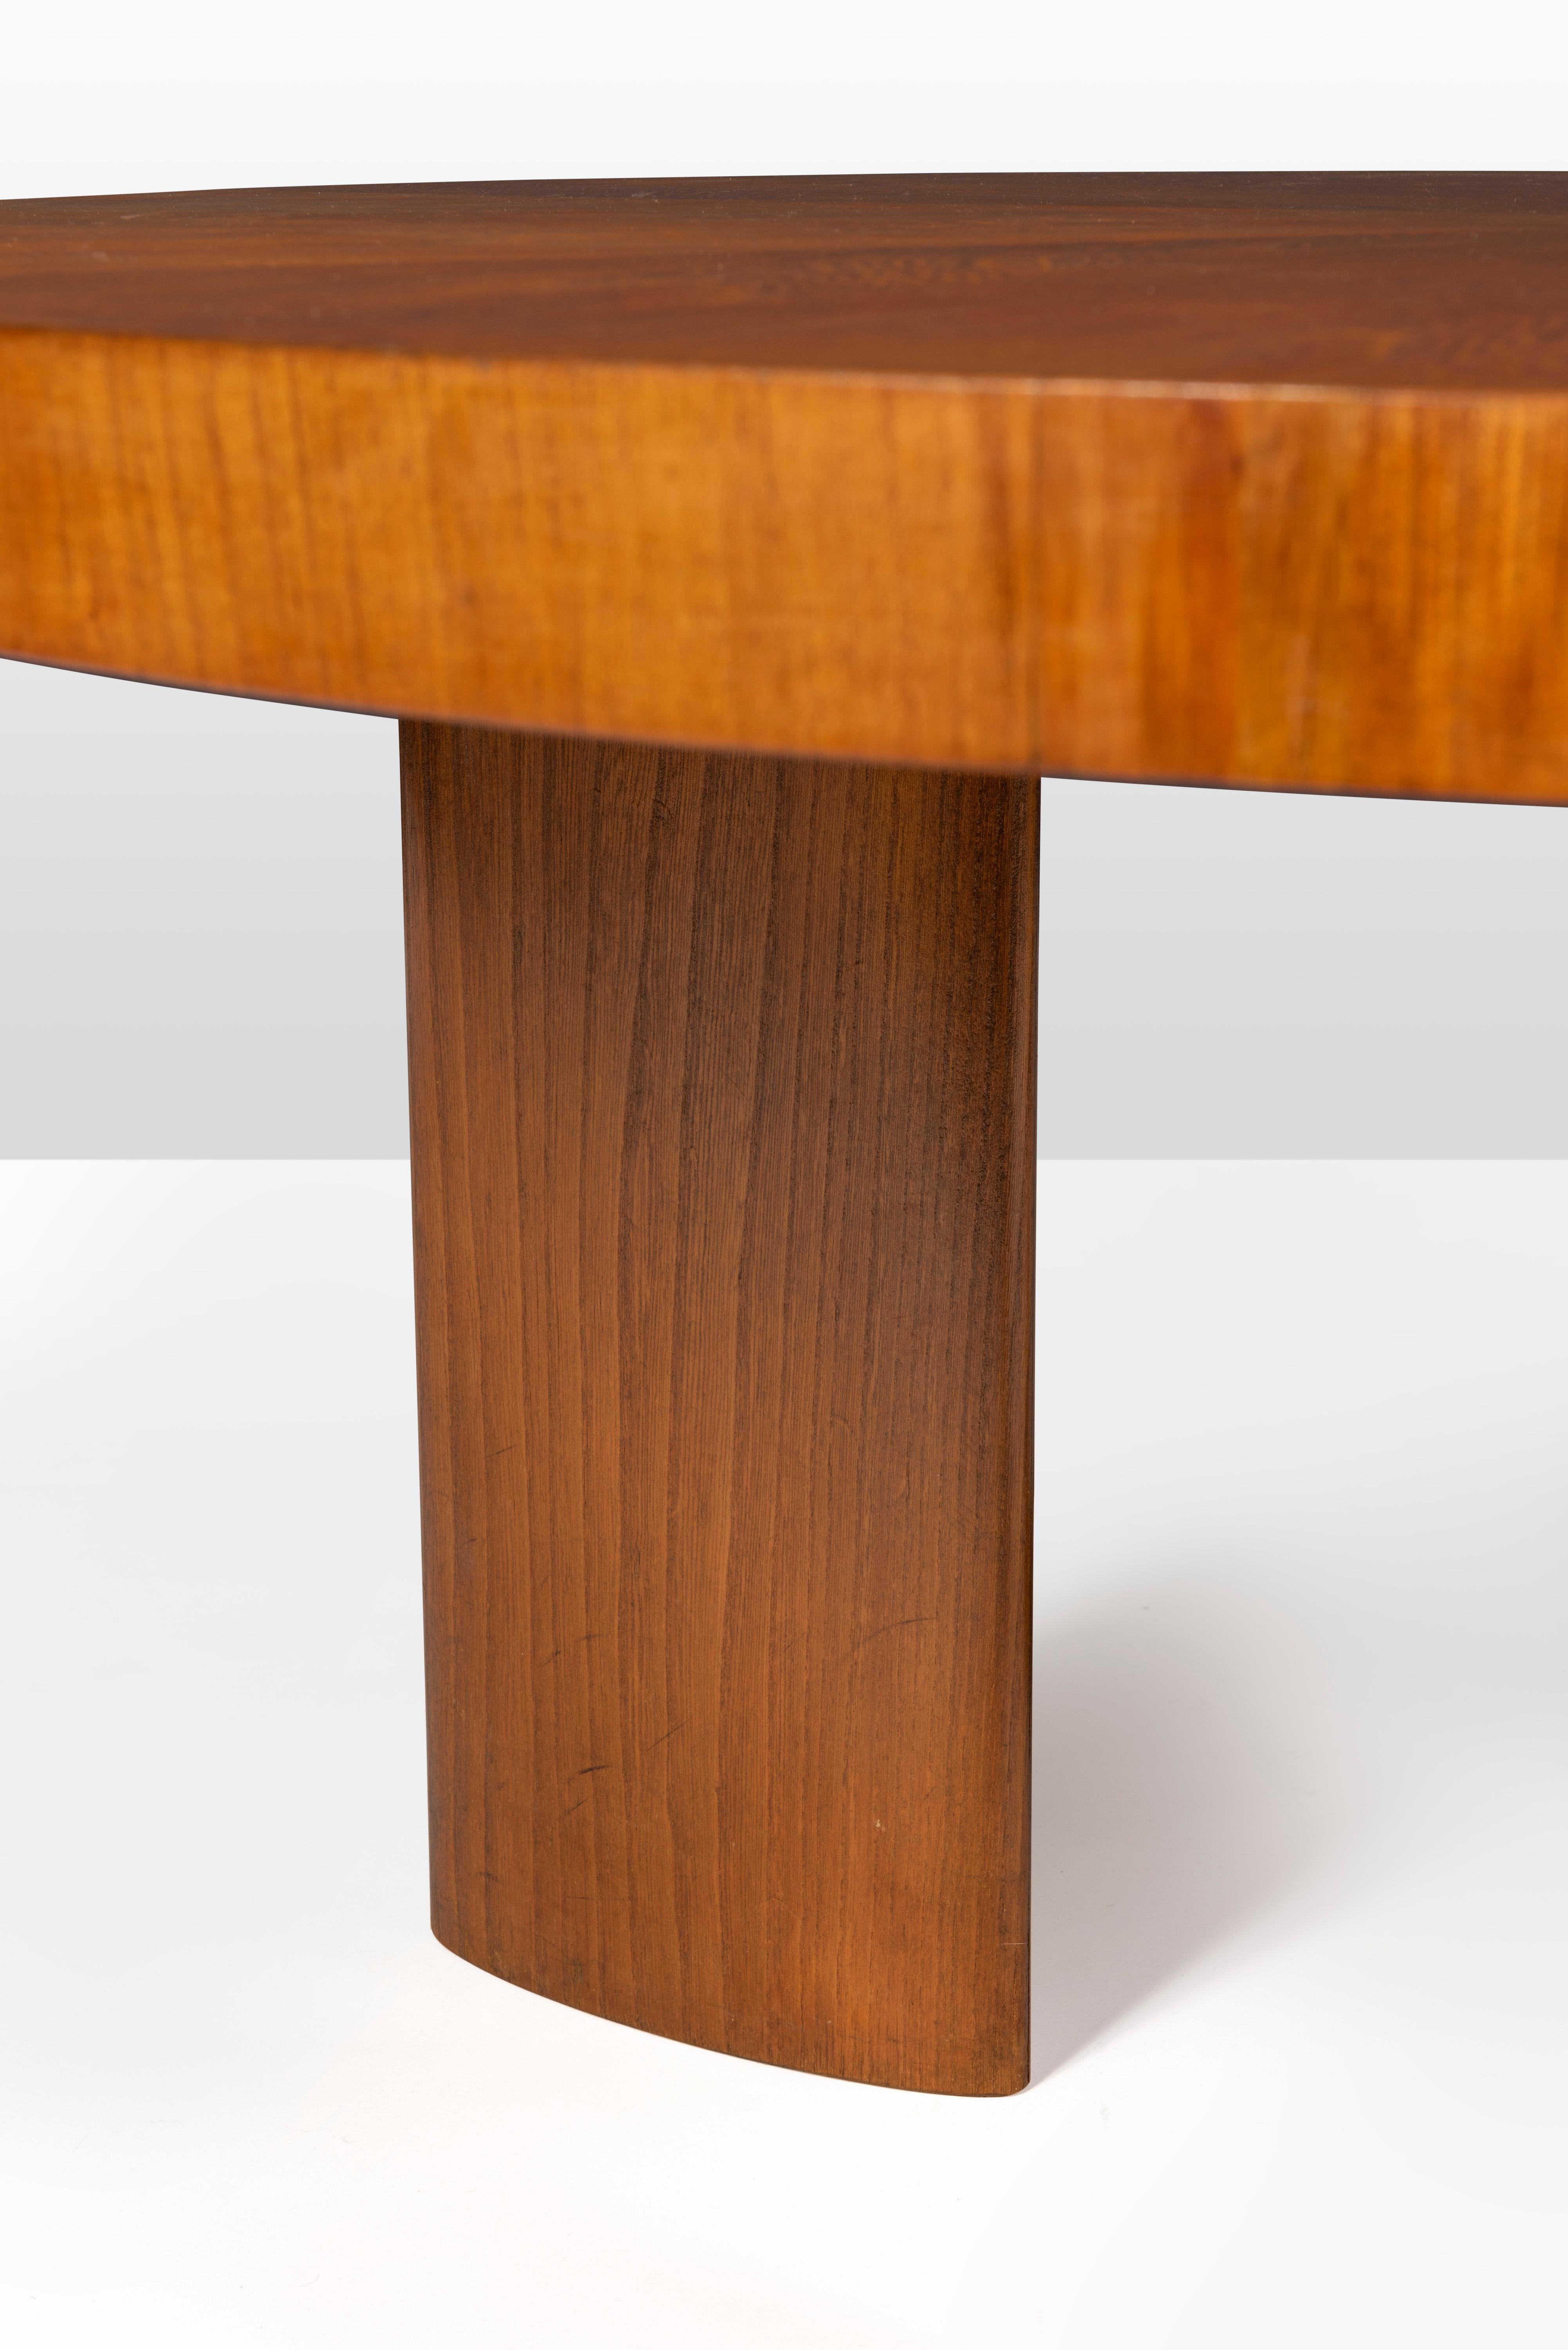 This table is from the Birka series. The Swedish modernist Axel-Einar Hjorth was a architect and industrial designer and is best know for his modern reduced design. He contributed significantly to the reputation and international breakthrough of